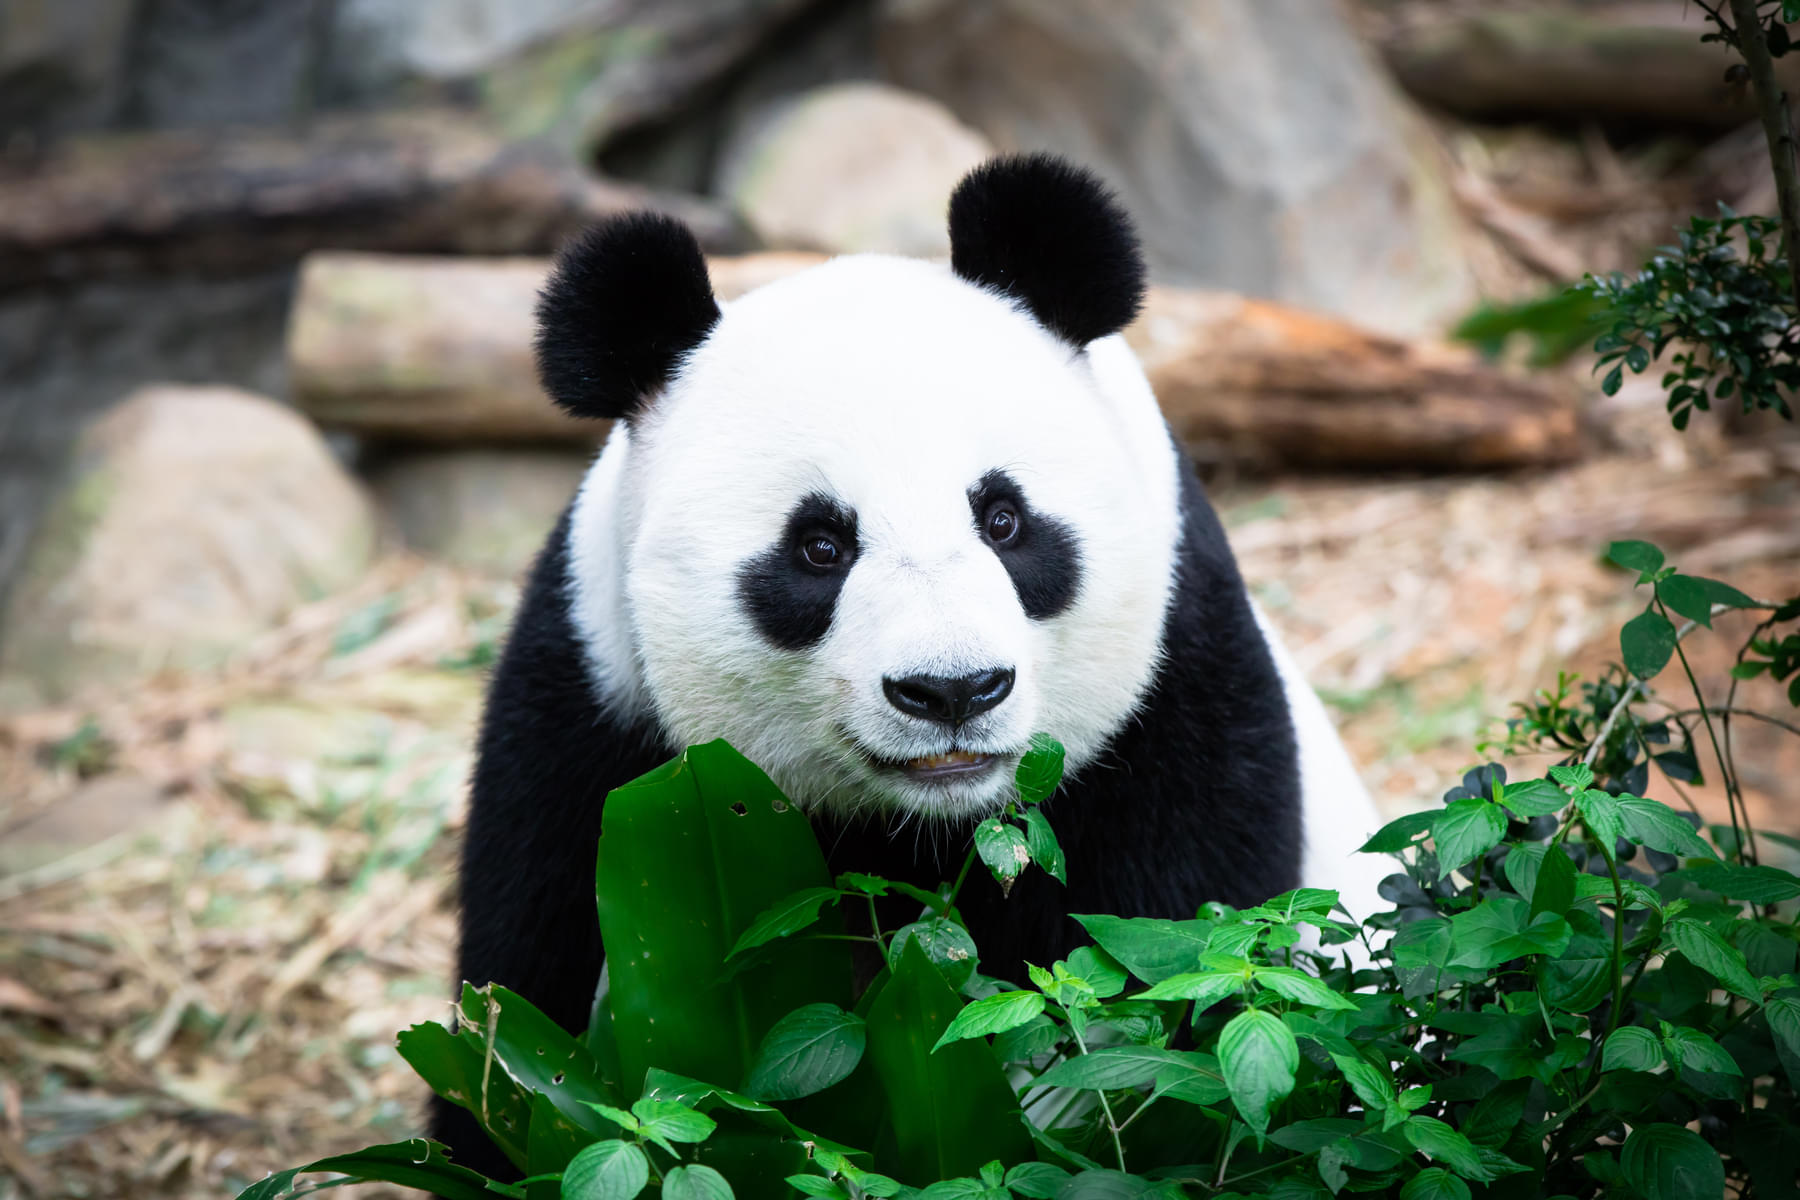 Encounter the charm of adorable pandas up close and personal.